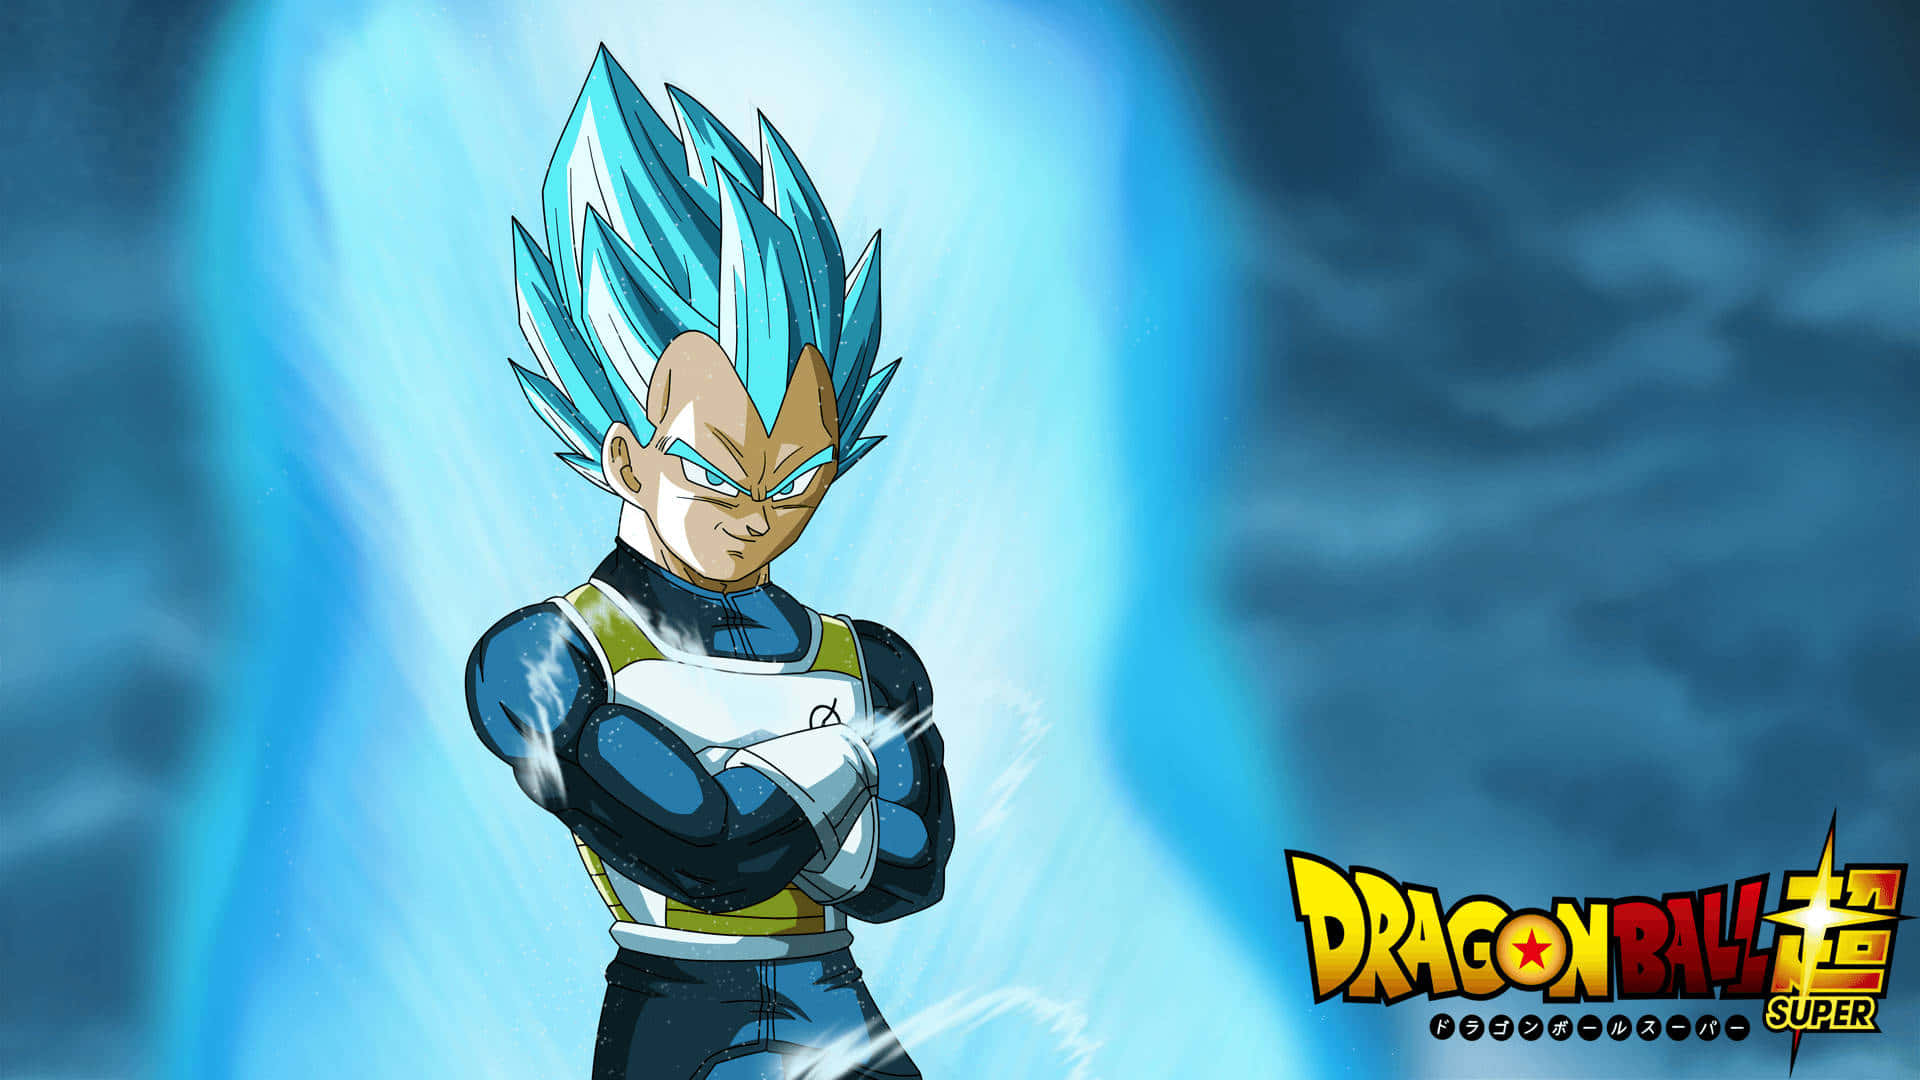 Power up your device with Cool Vegeta wallpaper! Wallpaper